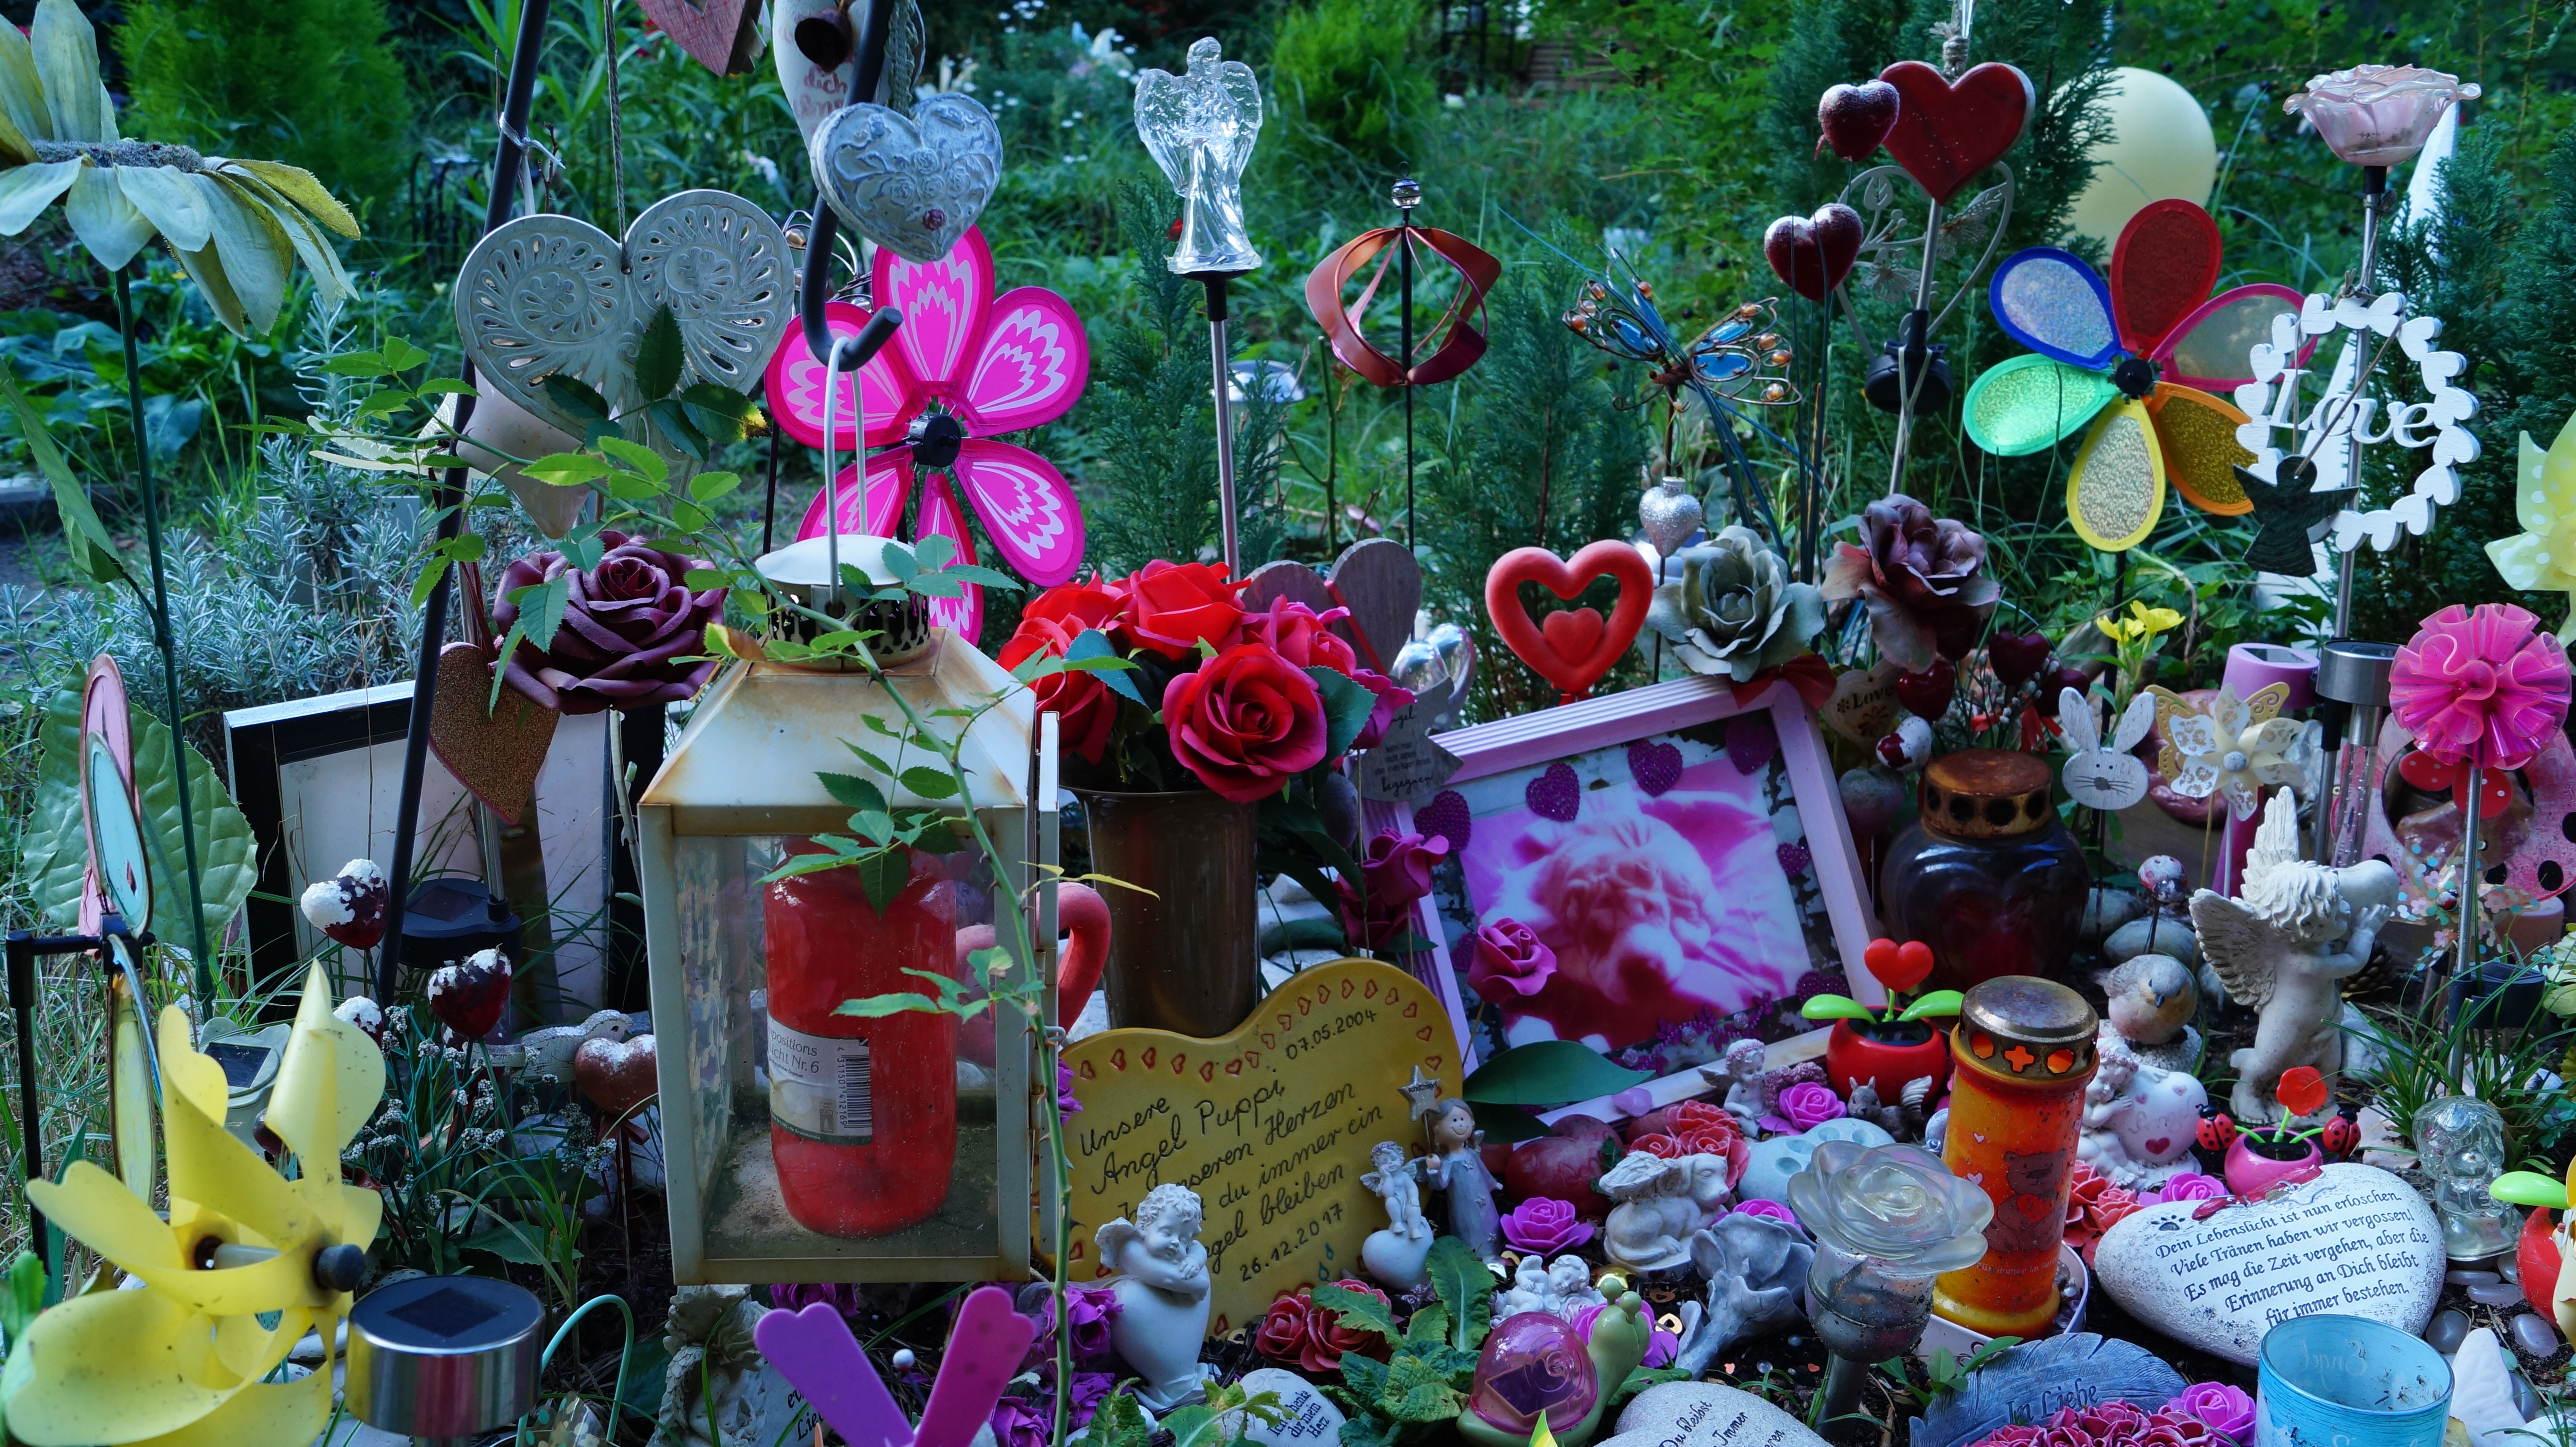 Animal tomb decorated with flowers, framed photographs, candles and colorful objects.